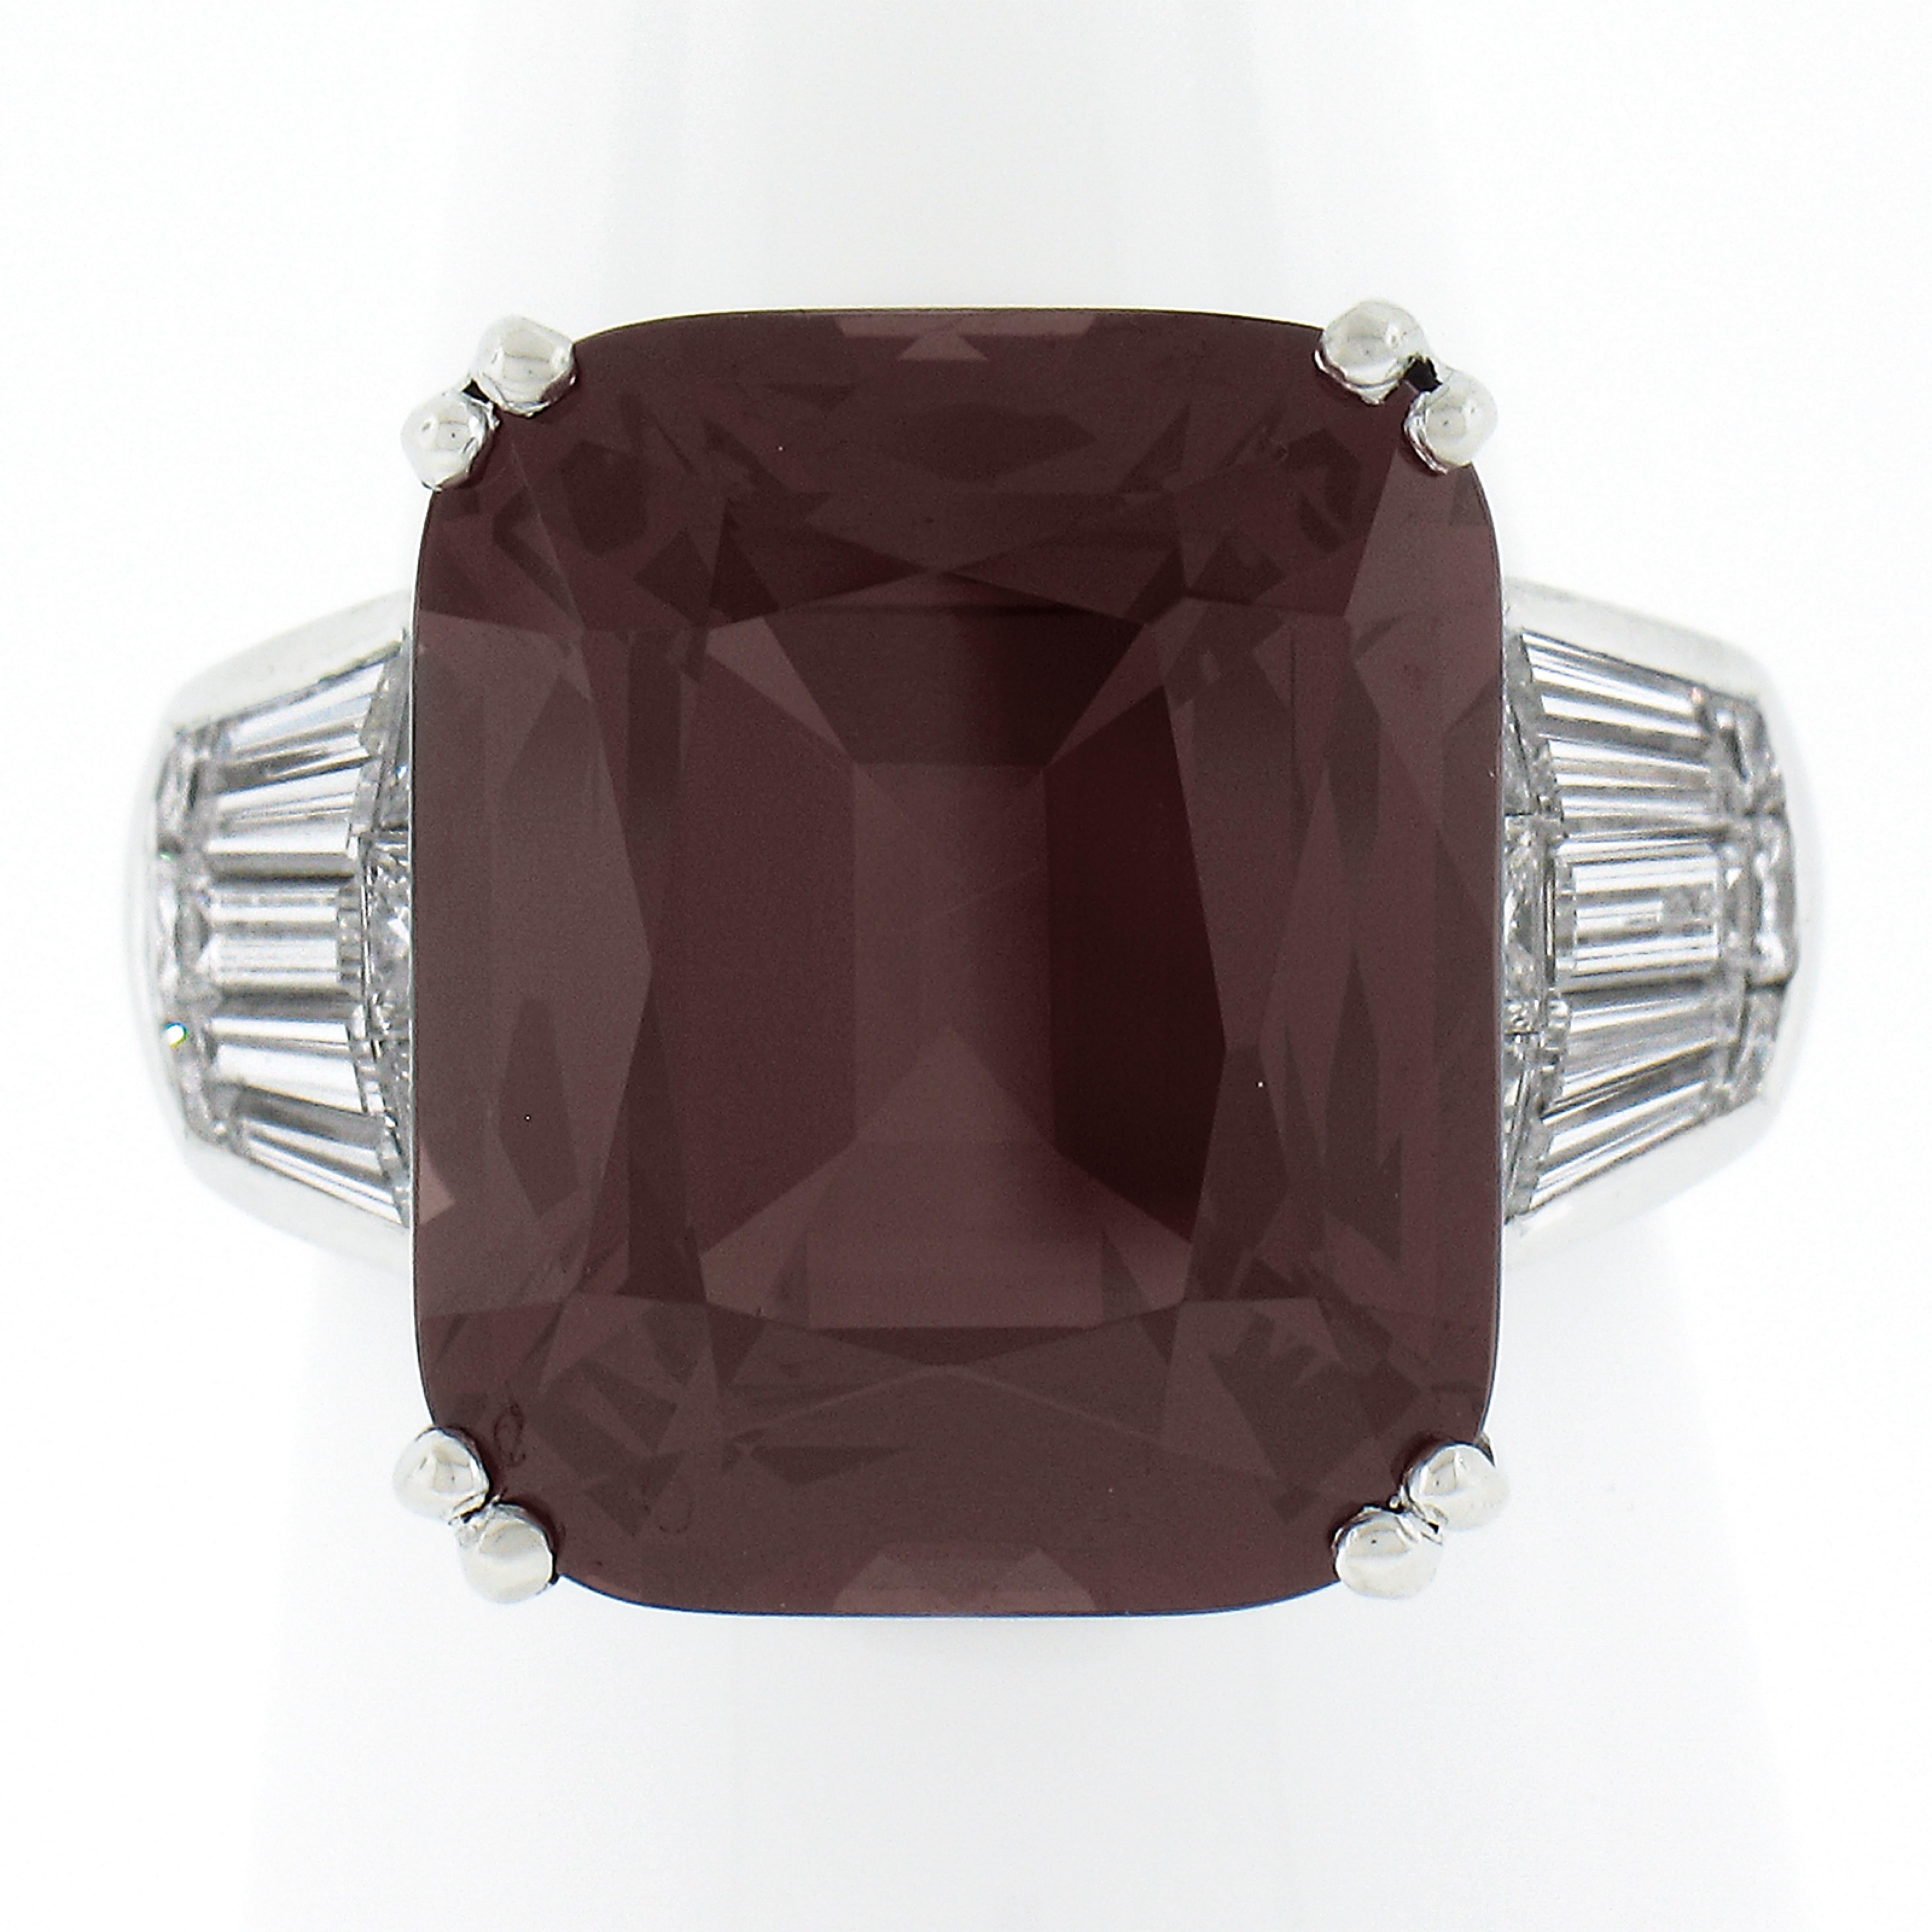 --Stone(s):--
(1) Natural Genuine Rhodolite Garnet - Elongated Cushion Brilliant Cut - Prong Set - Fire Purplish Red Color - 13ct (exact - certified)
** See Certification Details Below for Complete Info **
(22) Natural Genuine Diamonds - Baguette,